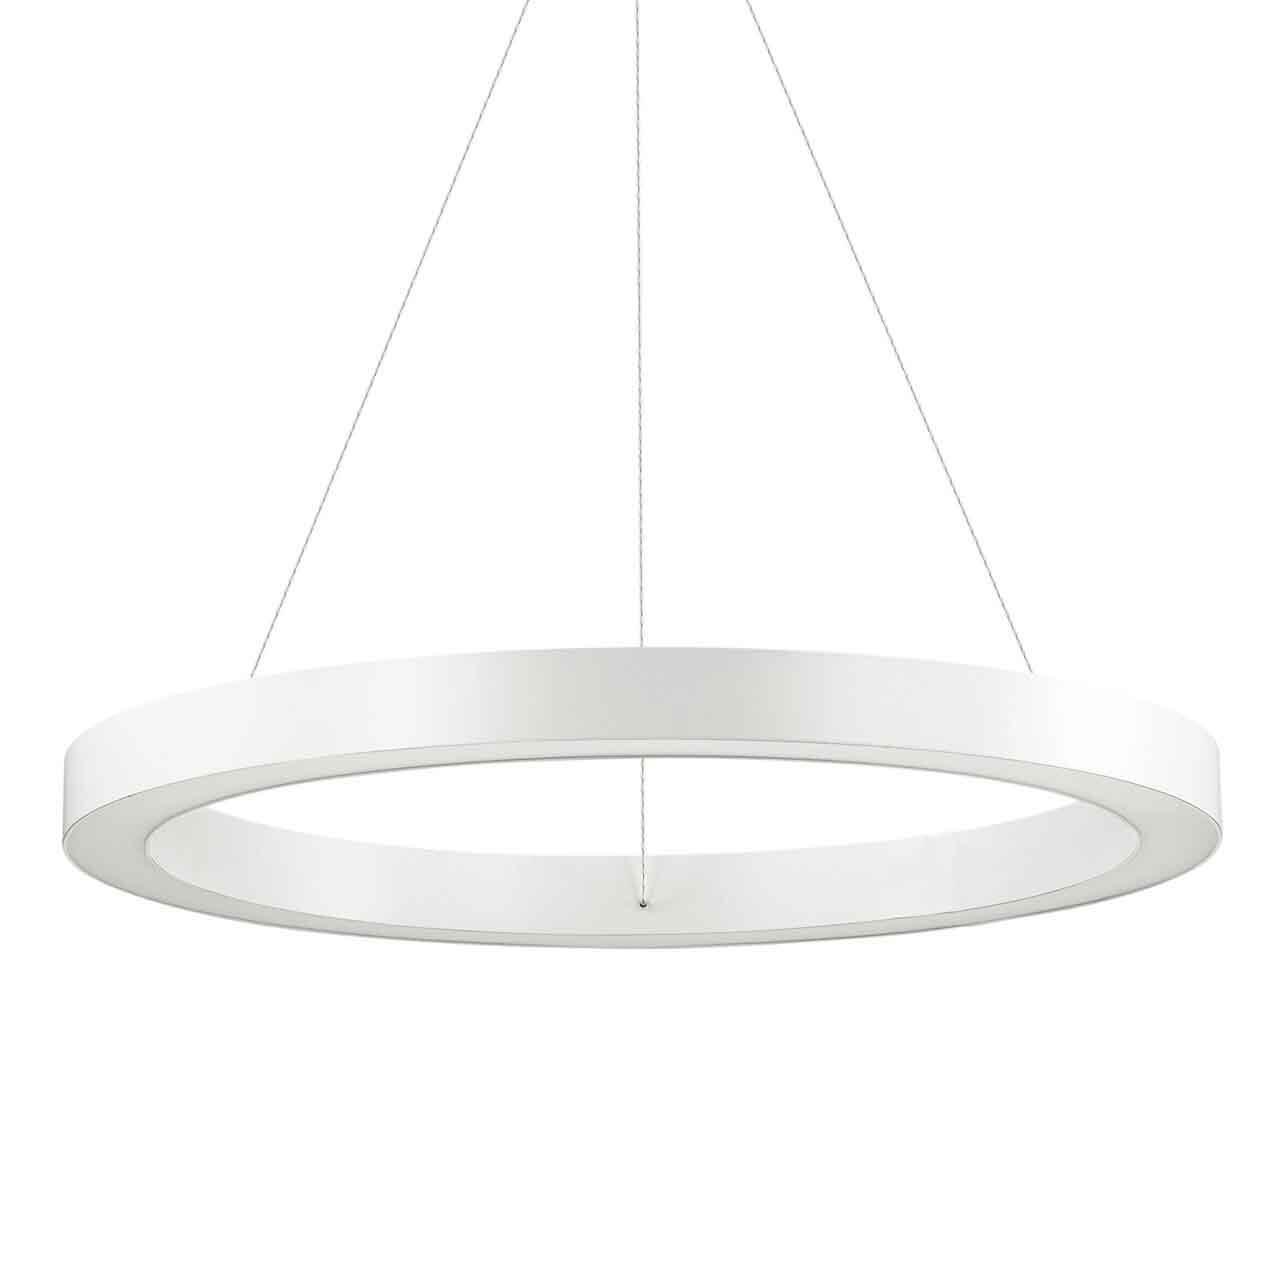    Ideal Lux Oracle D60 Round Bianco 211398